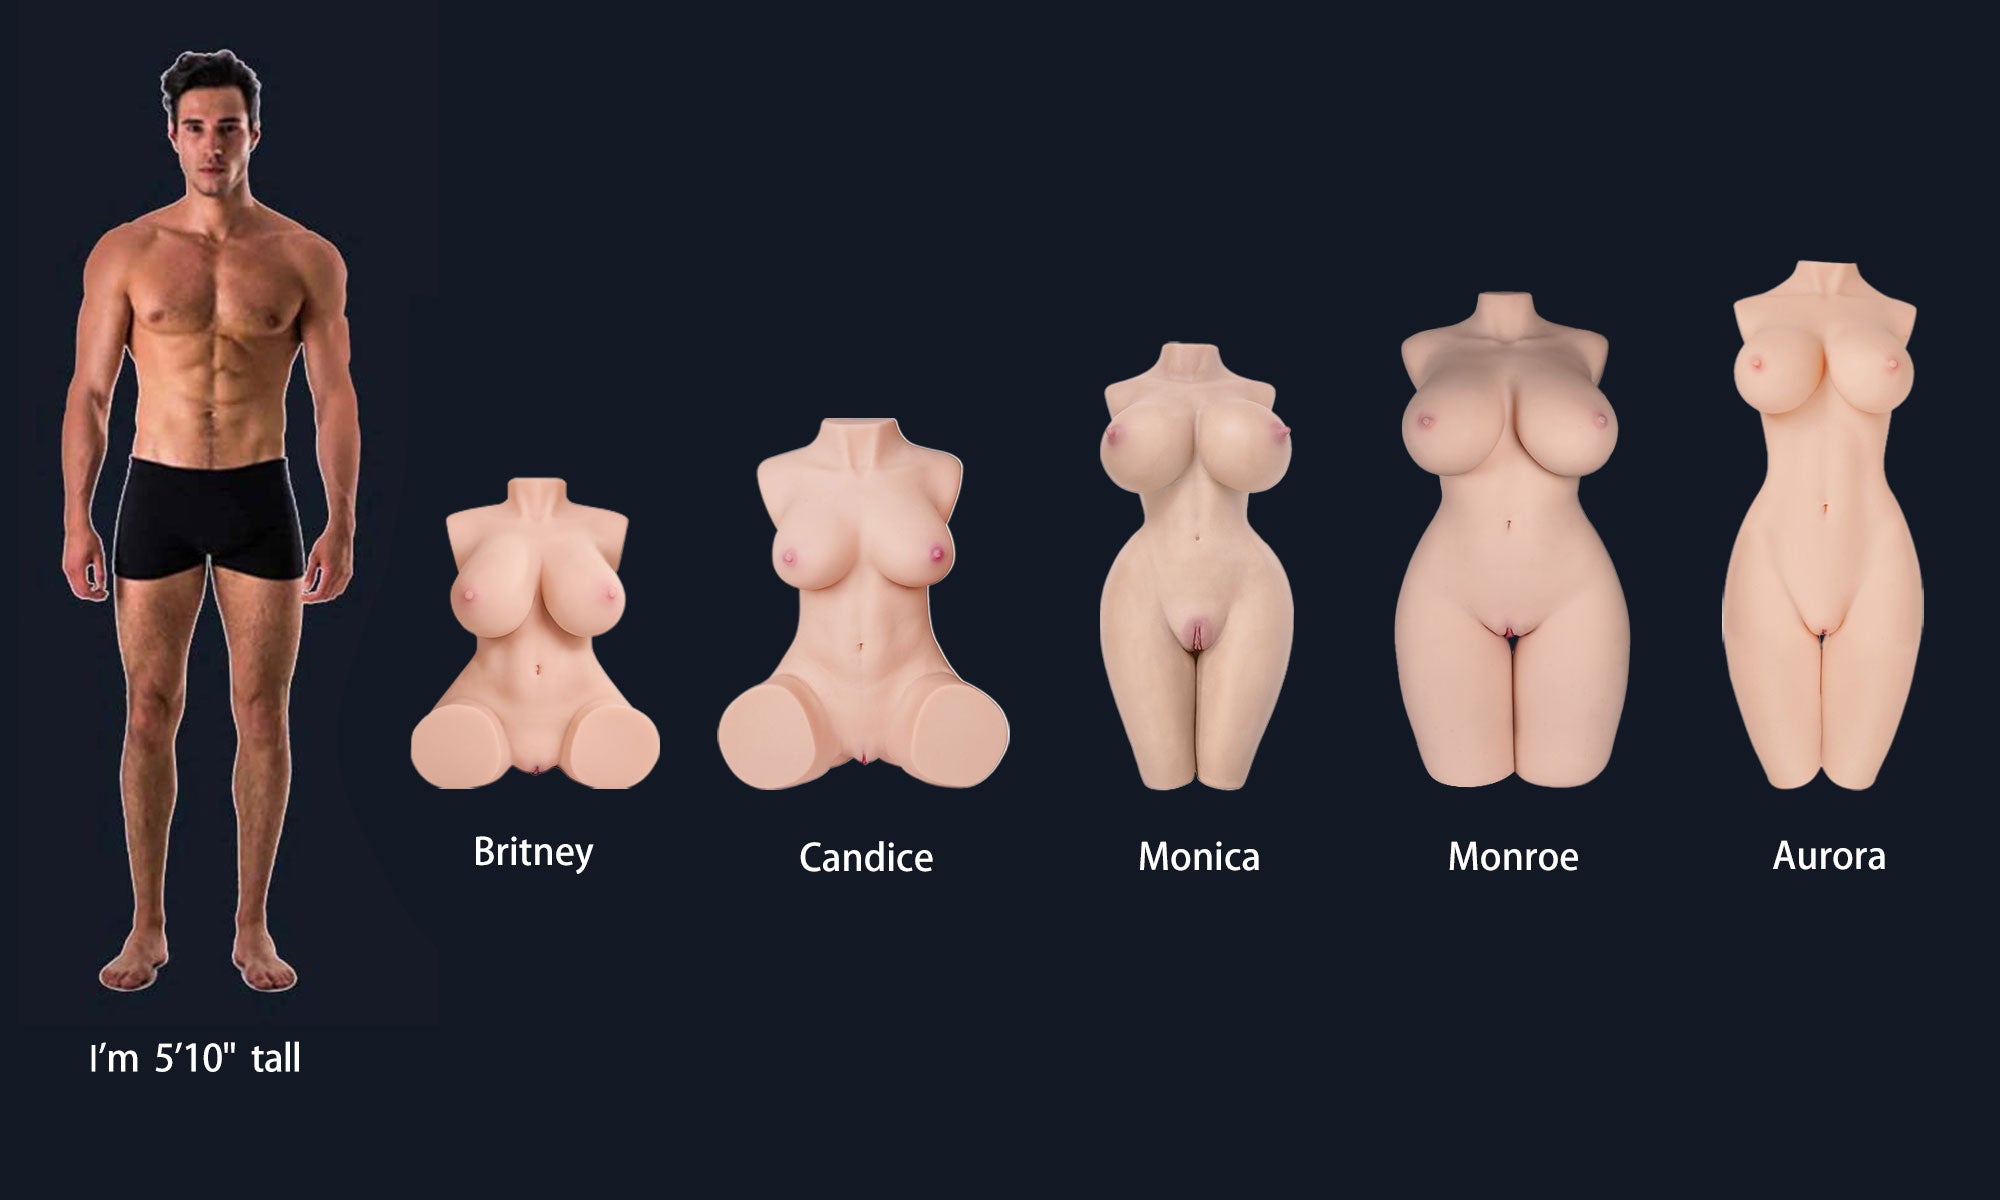 candice doll comparison with other hot dolls.jpg__PID:b88f27ea-429d-4ce3-bd2d-b3f6b7cf96e2